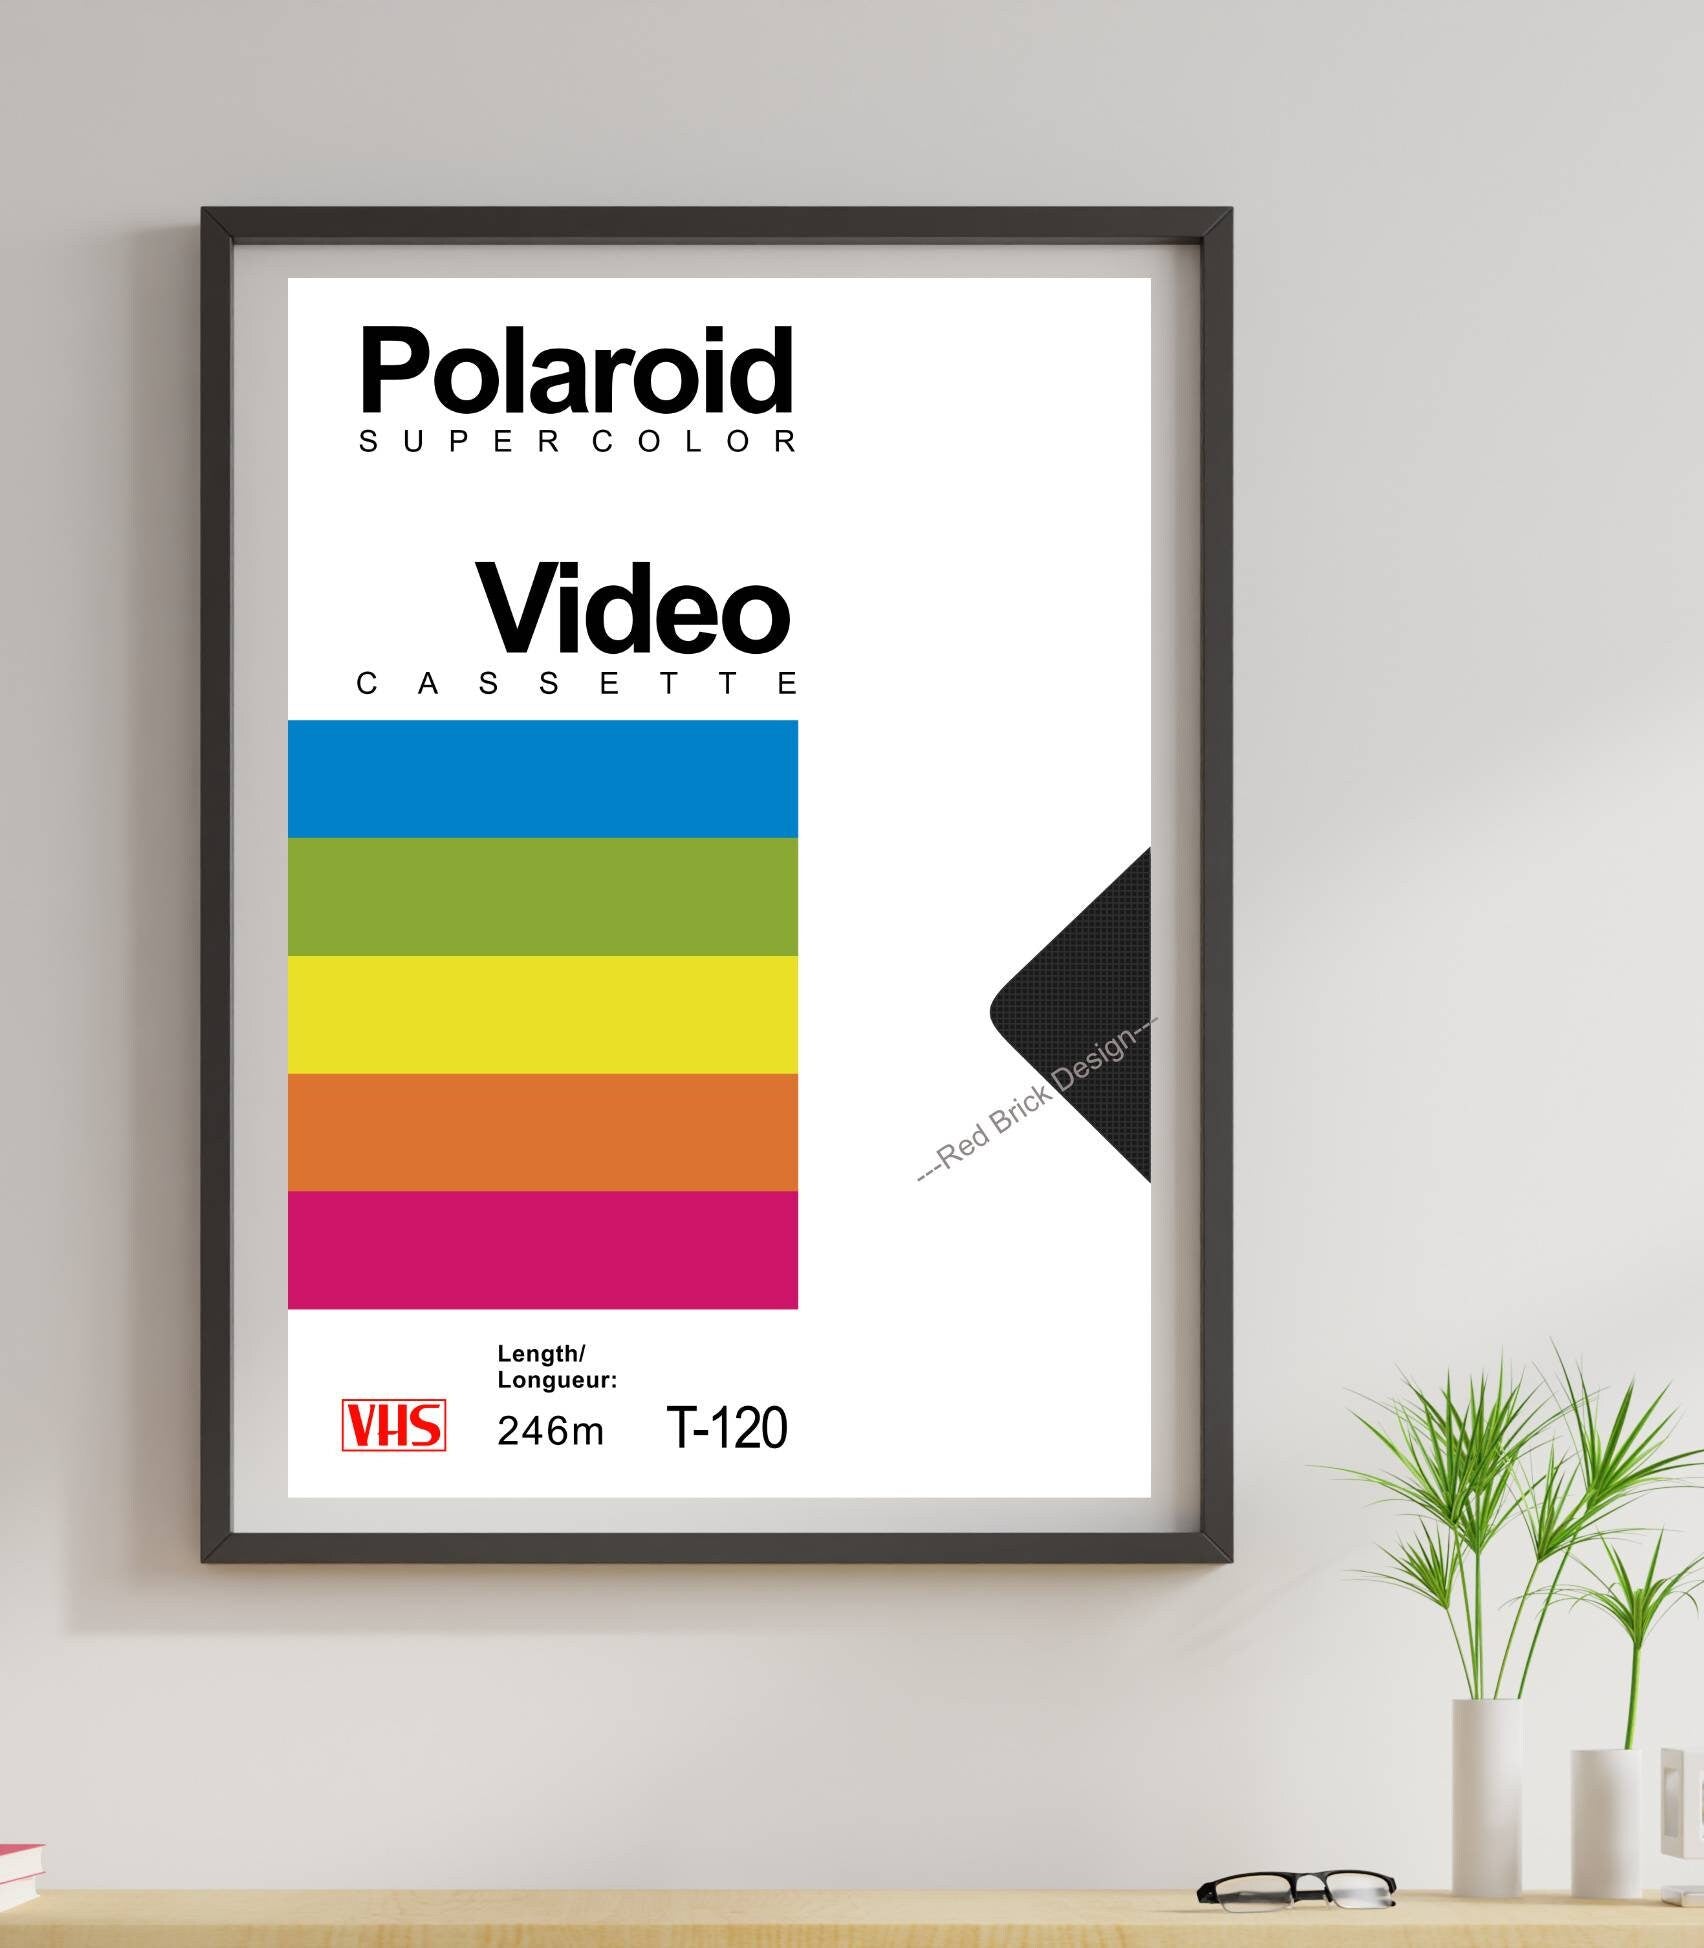 Nostalgic 80s and 90s Décor Poster